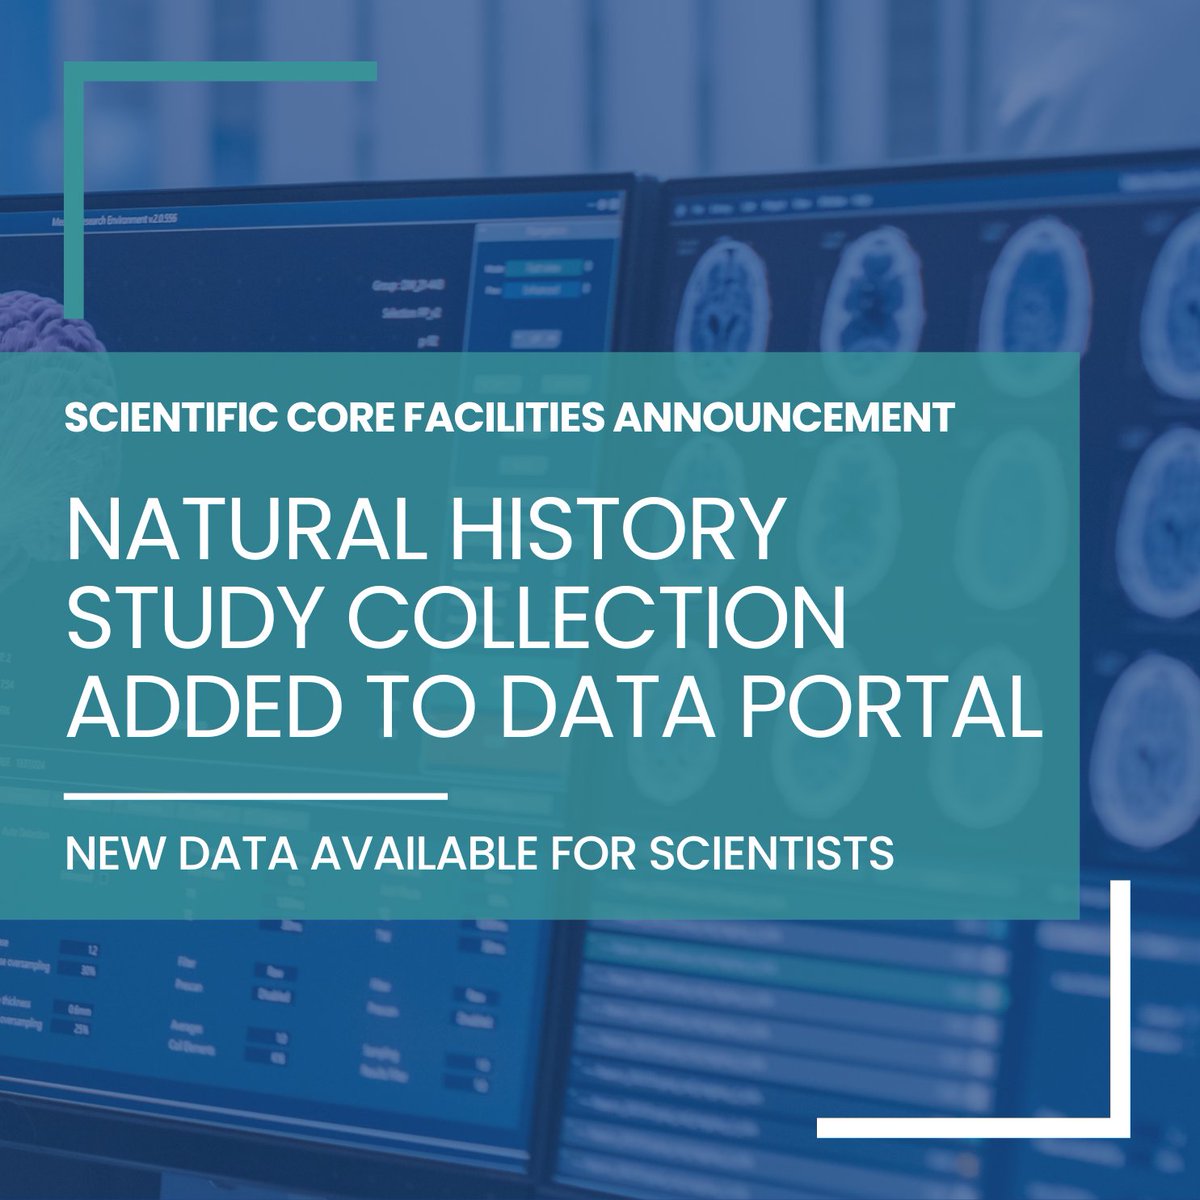 The Natural History Study Collection is now available on the @TargetALS_fdn Data Portal, created in collaboration with @DNAstack & @Verily. Access data from our ongoing study to drive biomarker & target discovery for #ALS. bit.ly/3WGtBSZ #ALSResearch #EndALS